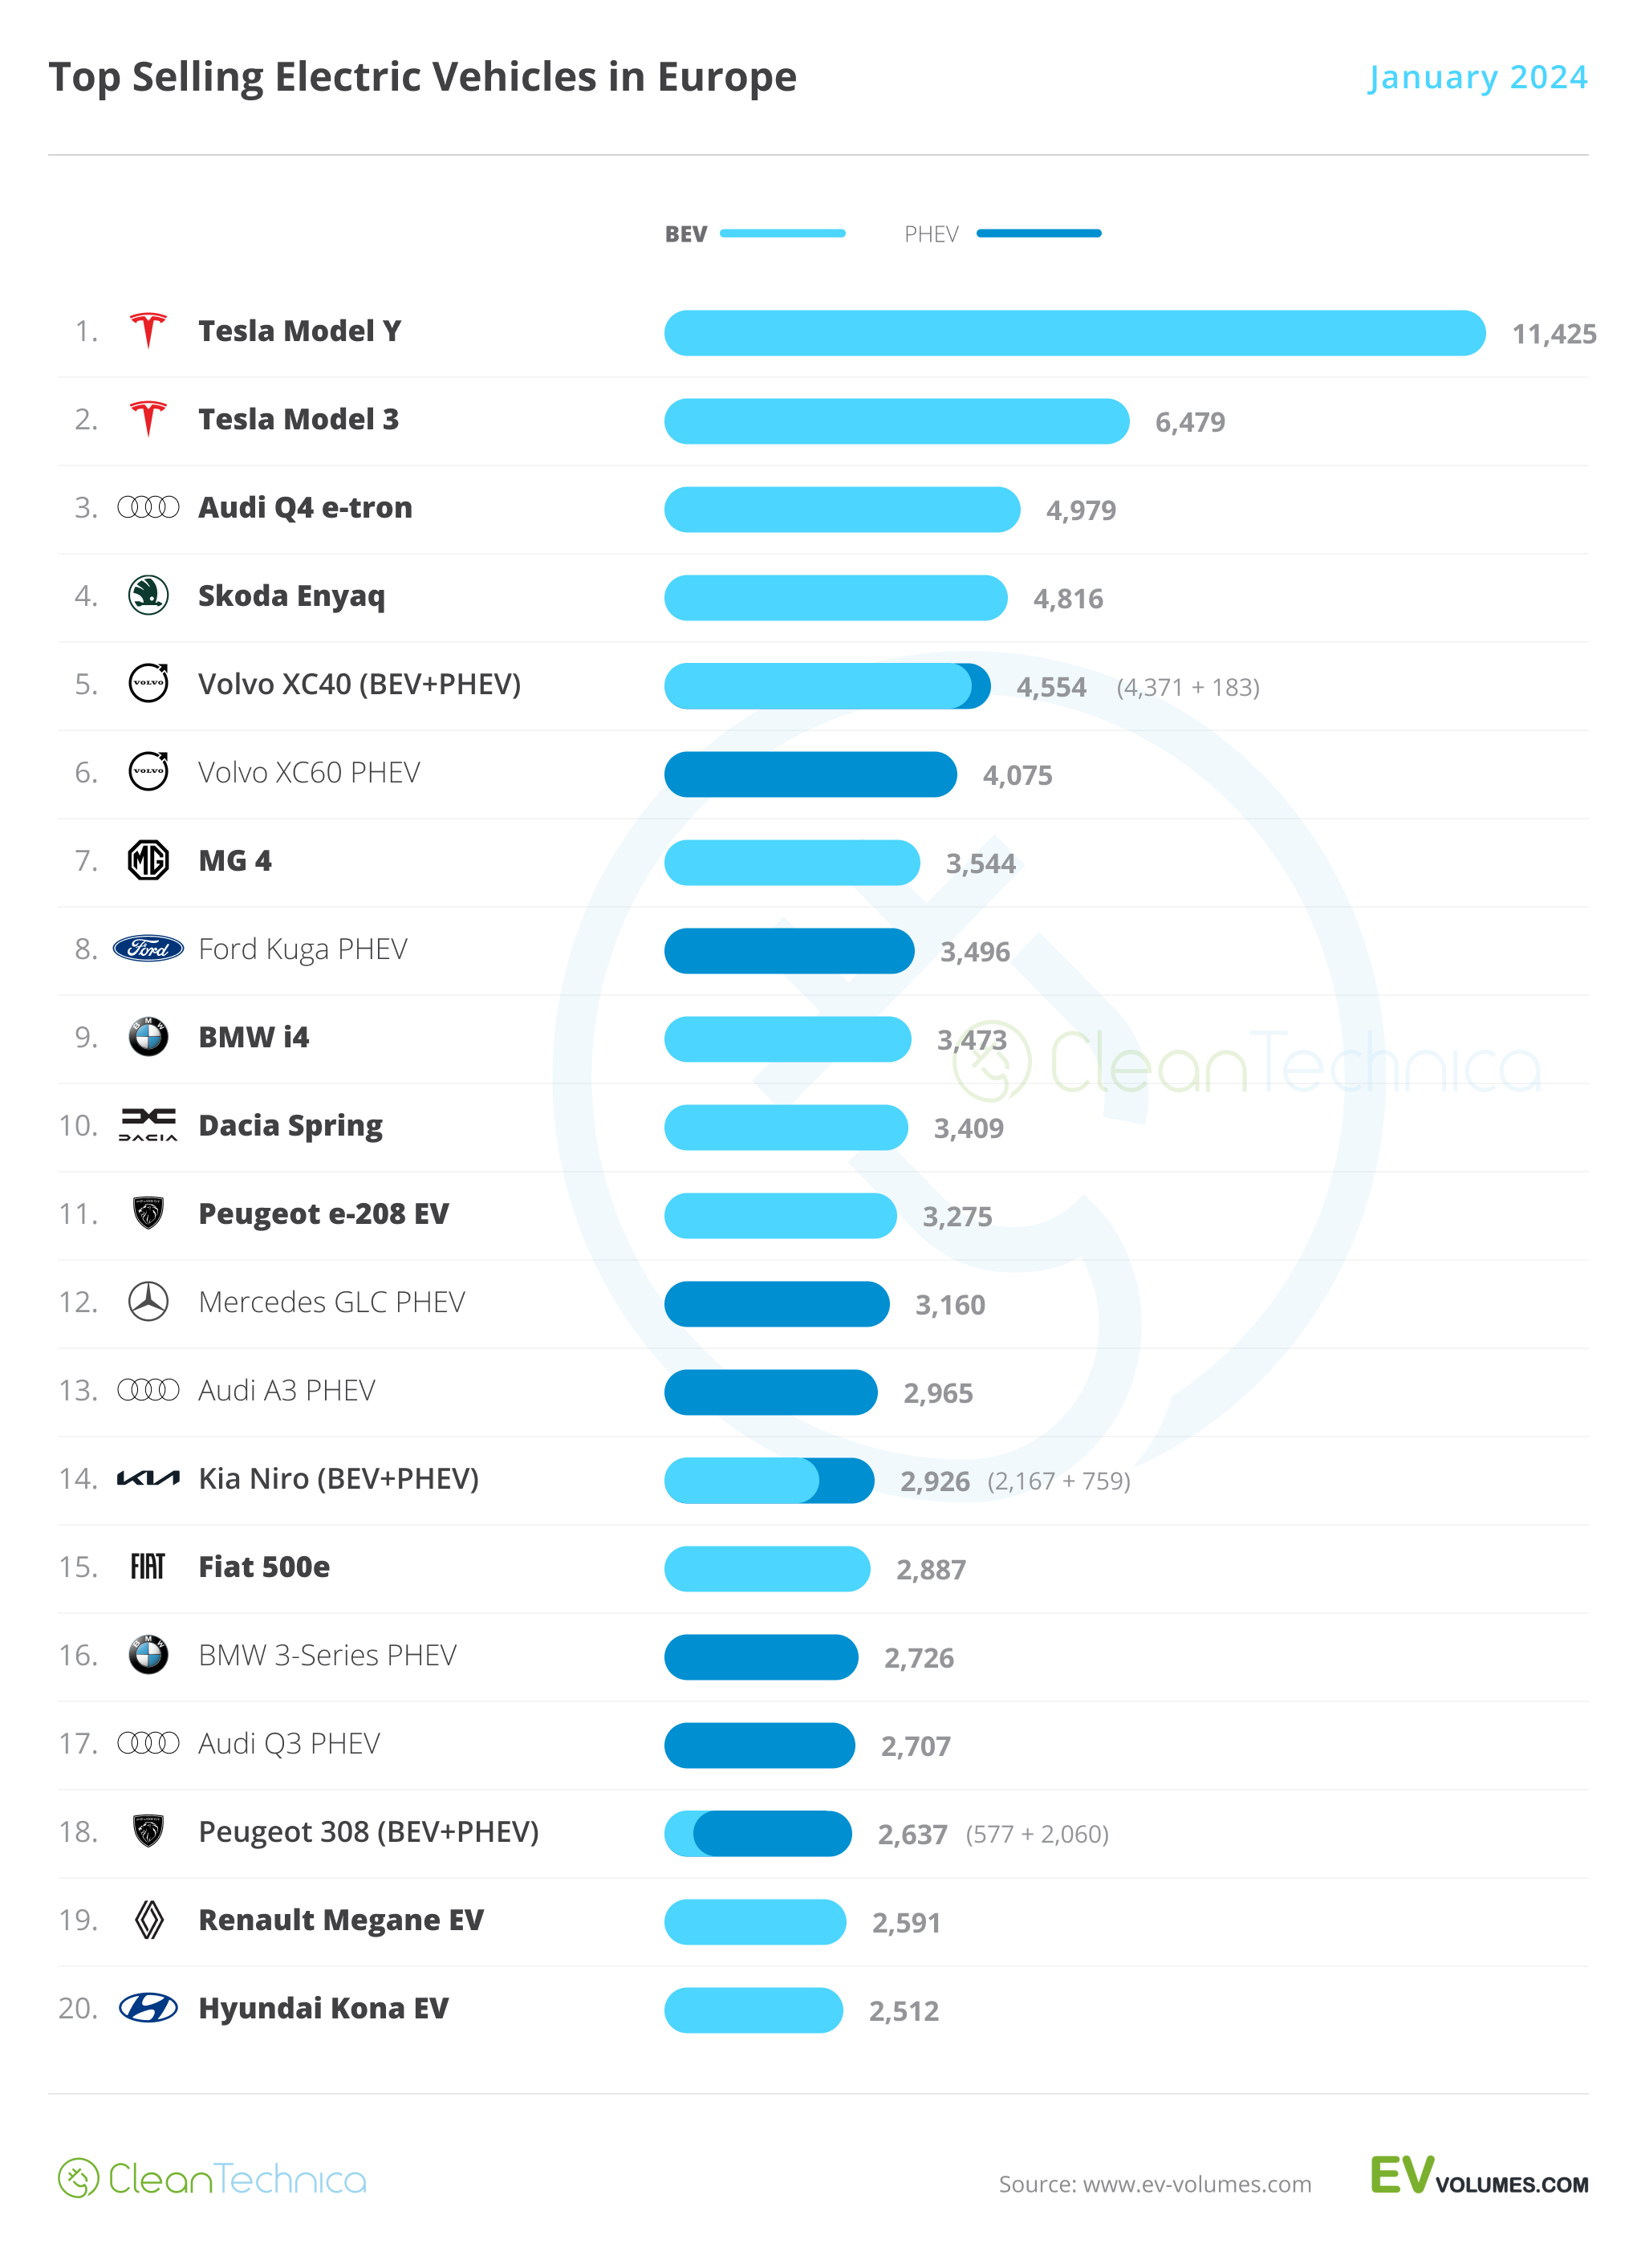 100% Electric Vehicles = 12% Of New Car Sales In Europe In January - CleanTechnica